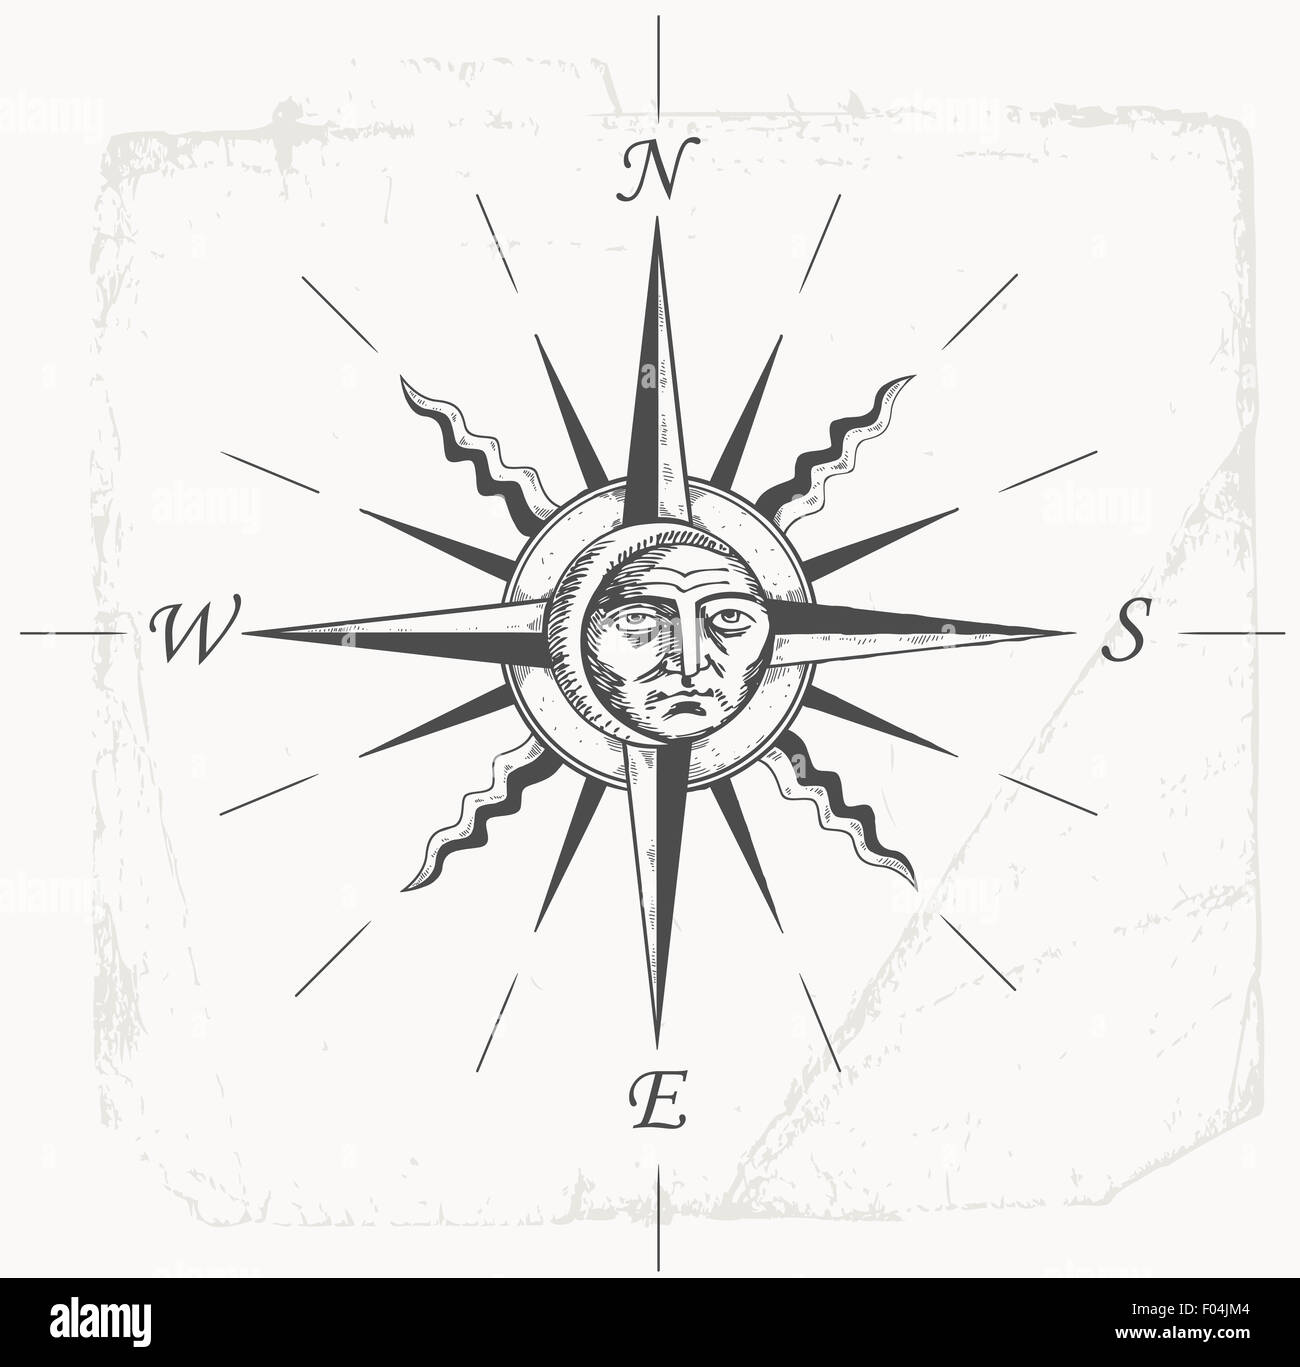 Vintage compass rose- drawing Stock Photo